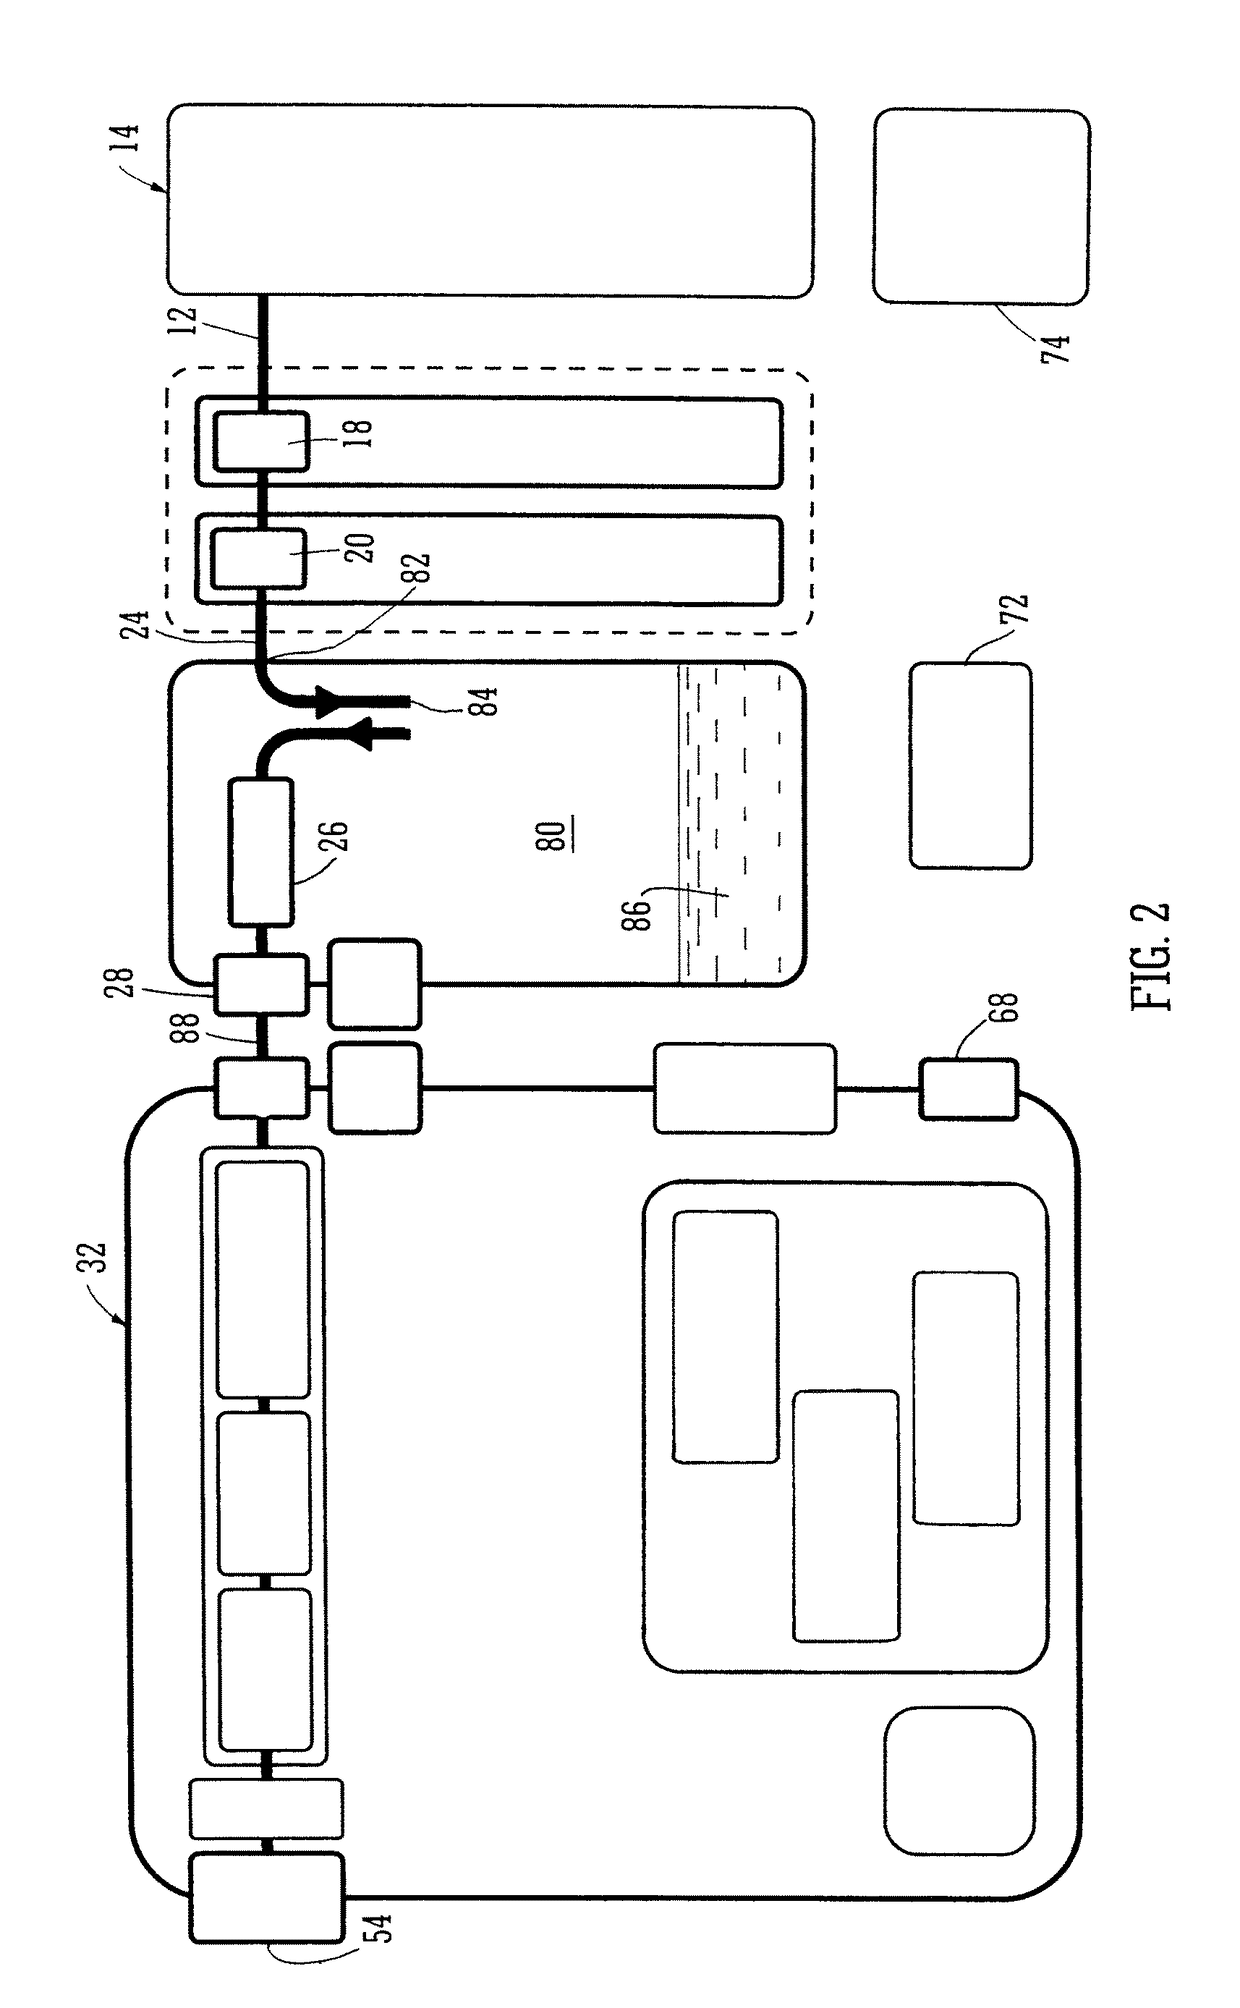 Apparatus for topical negative pressure therapy